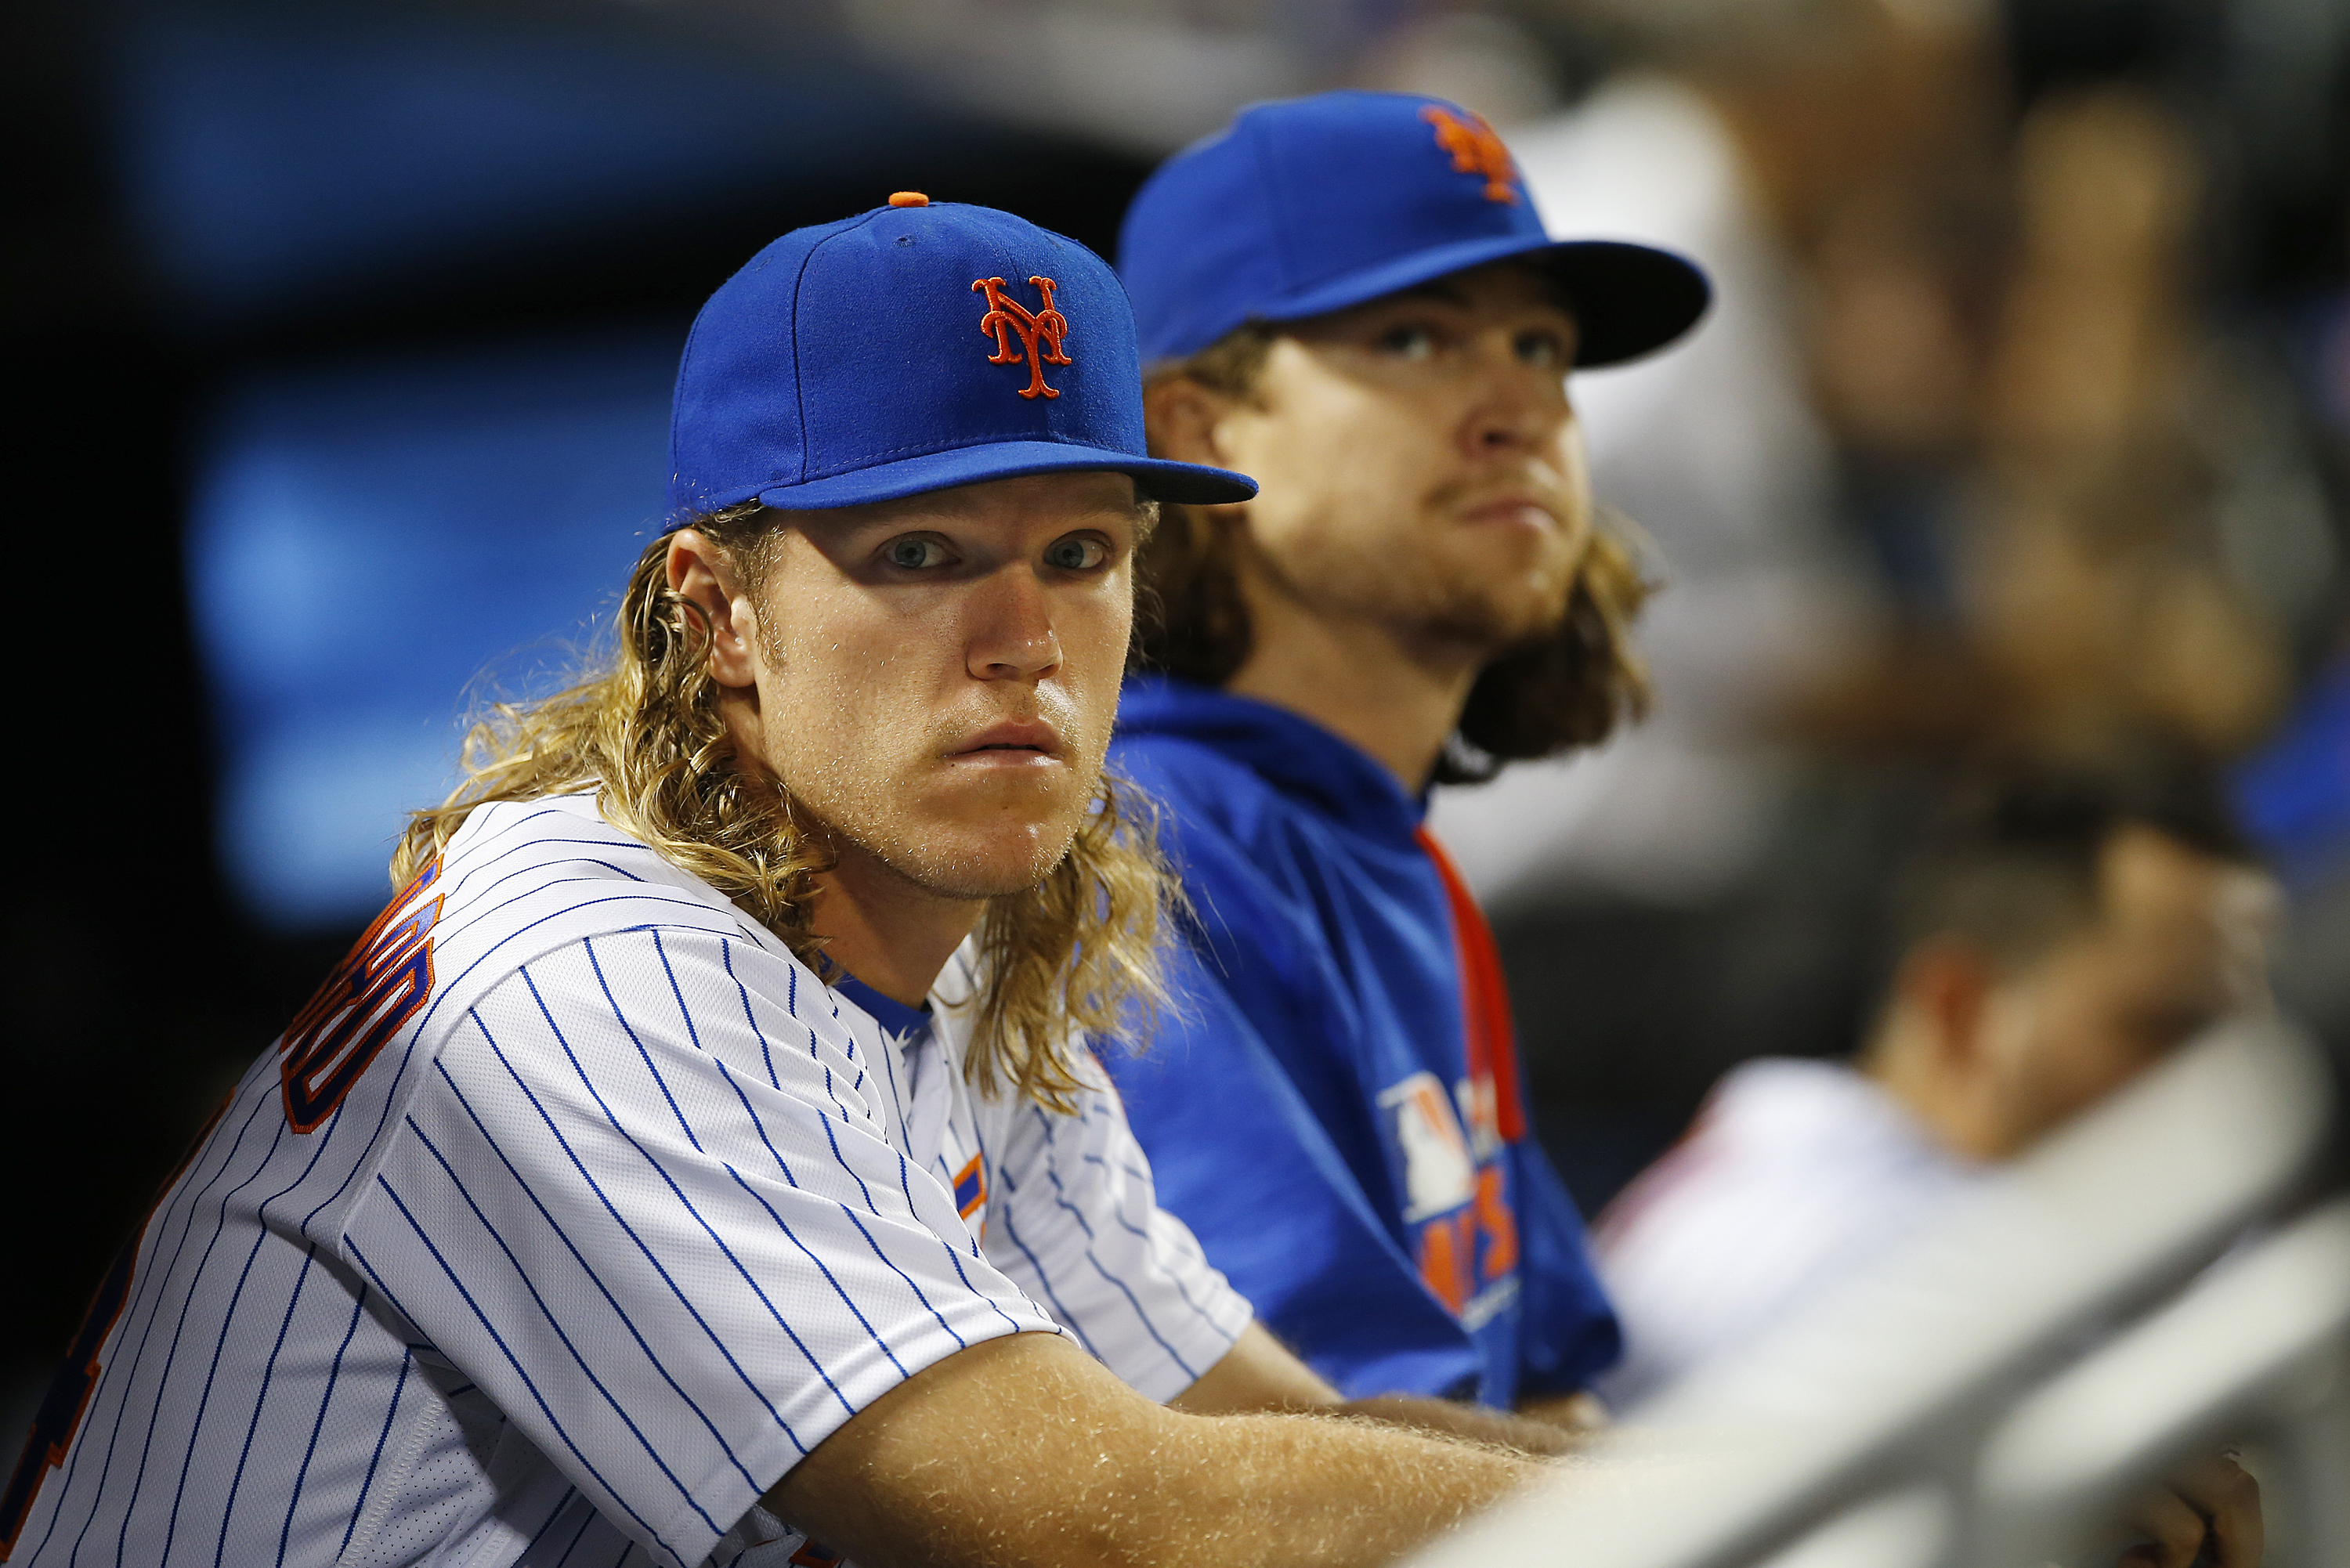 The New York Mets should not trade Jacob deGrom or Noah Syndergaard